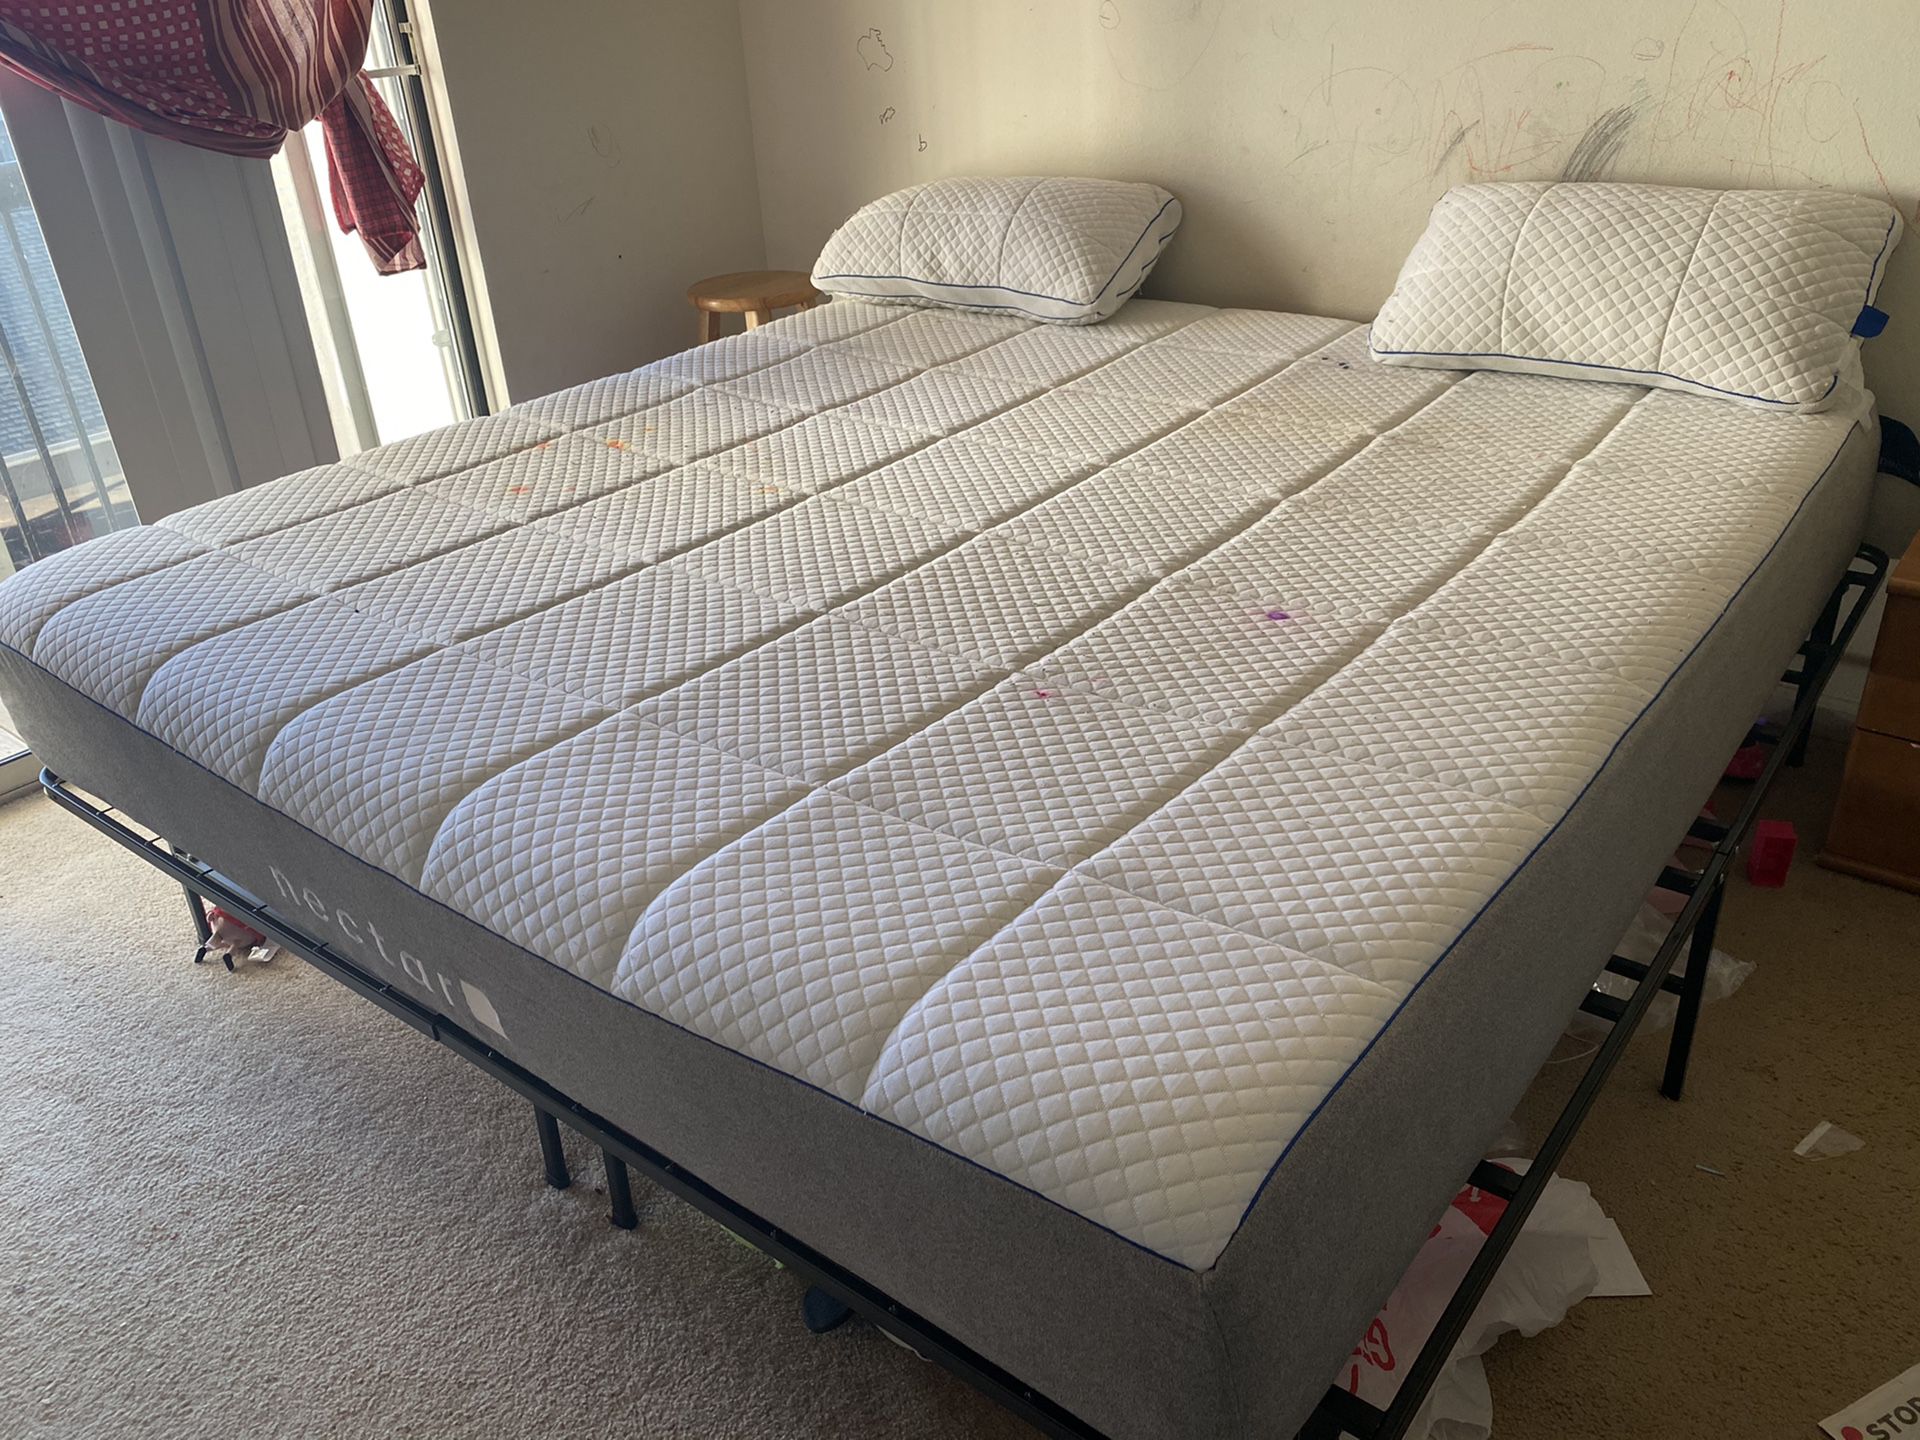 The Nectar Memory Foam Mattress King Size + Bed Frame